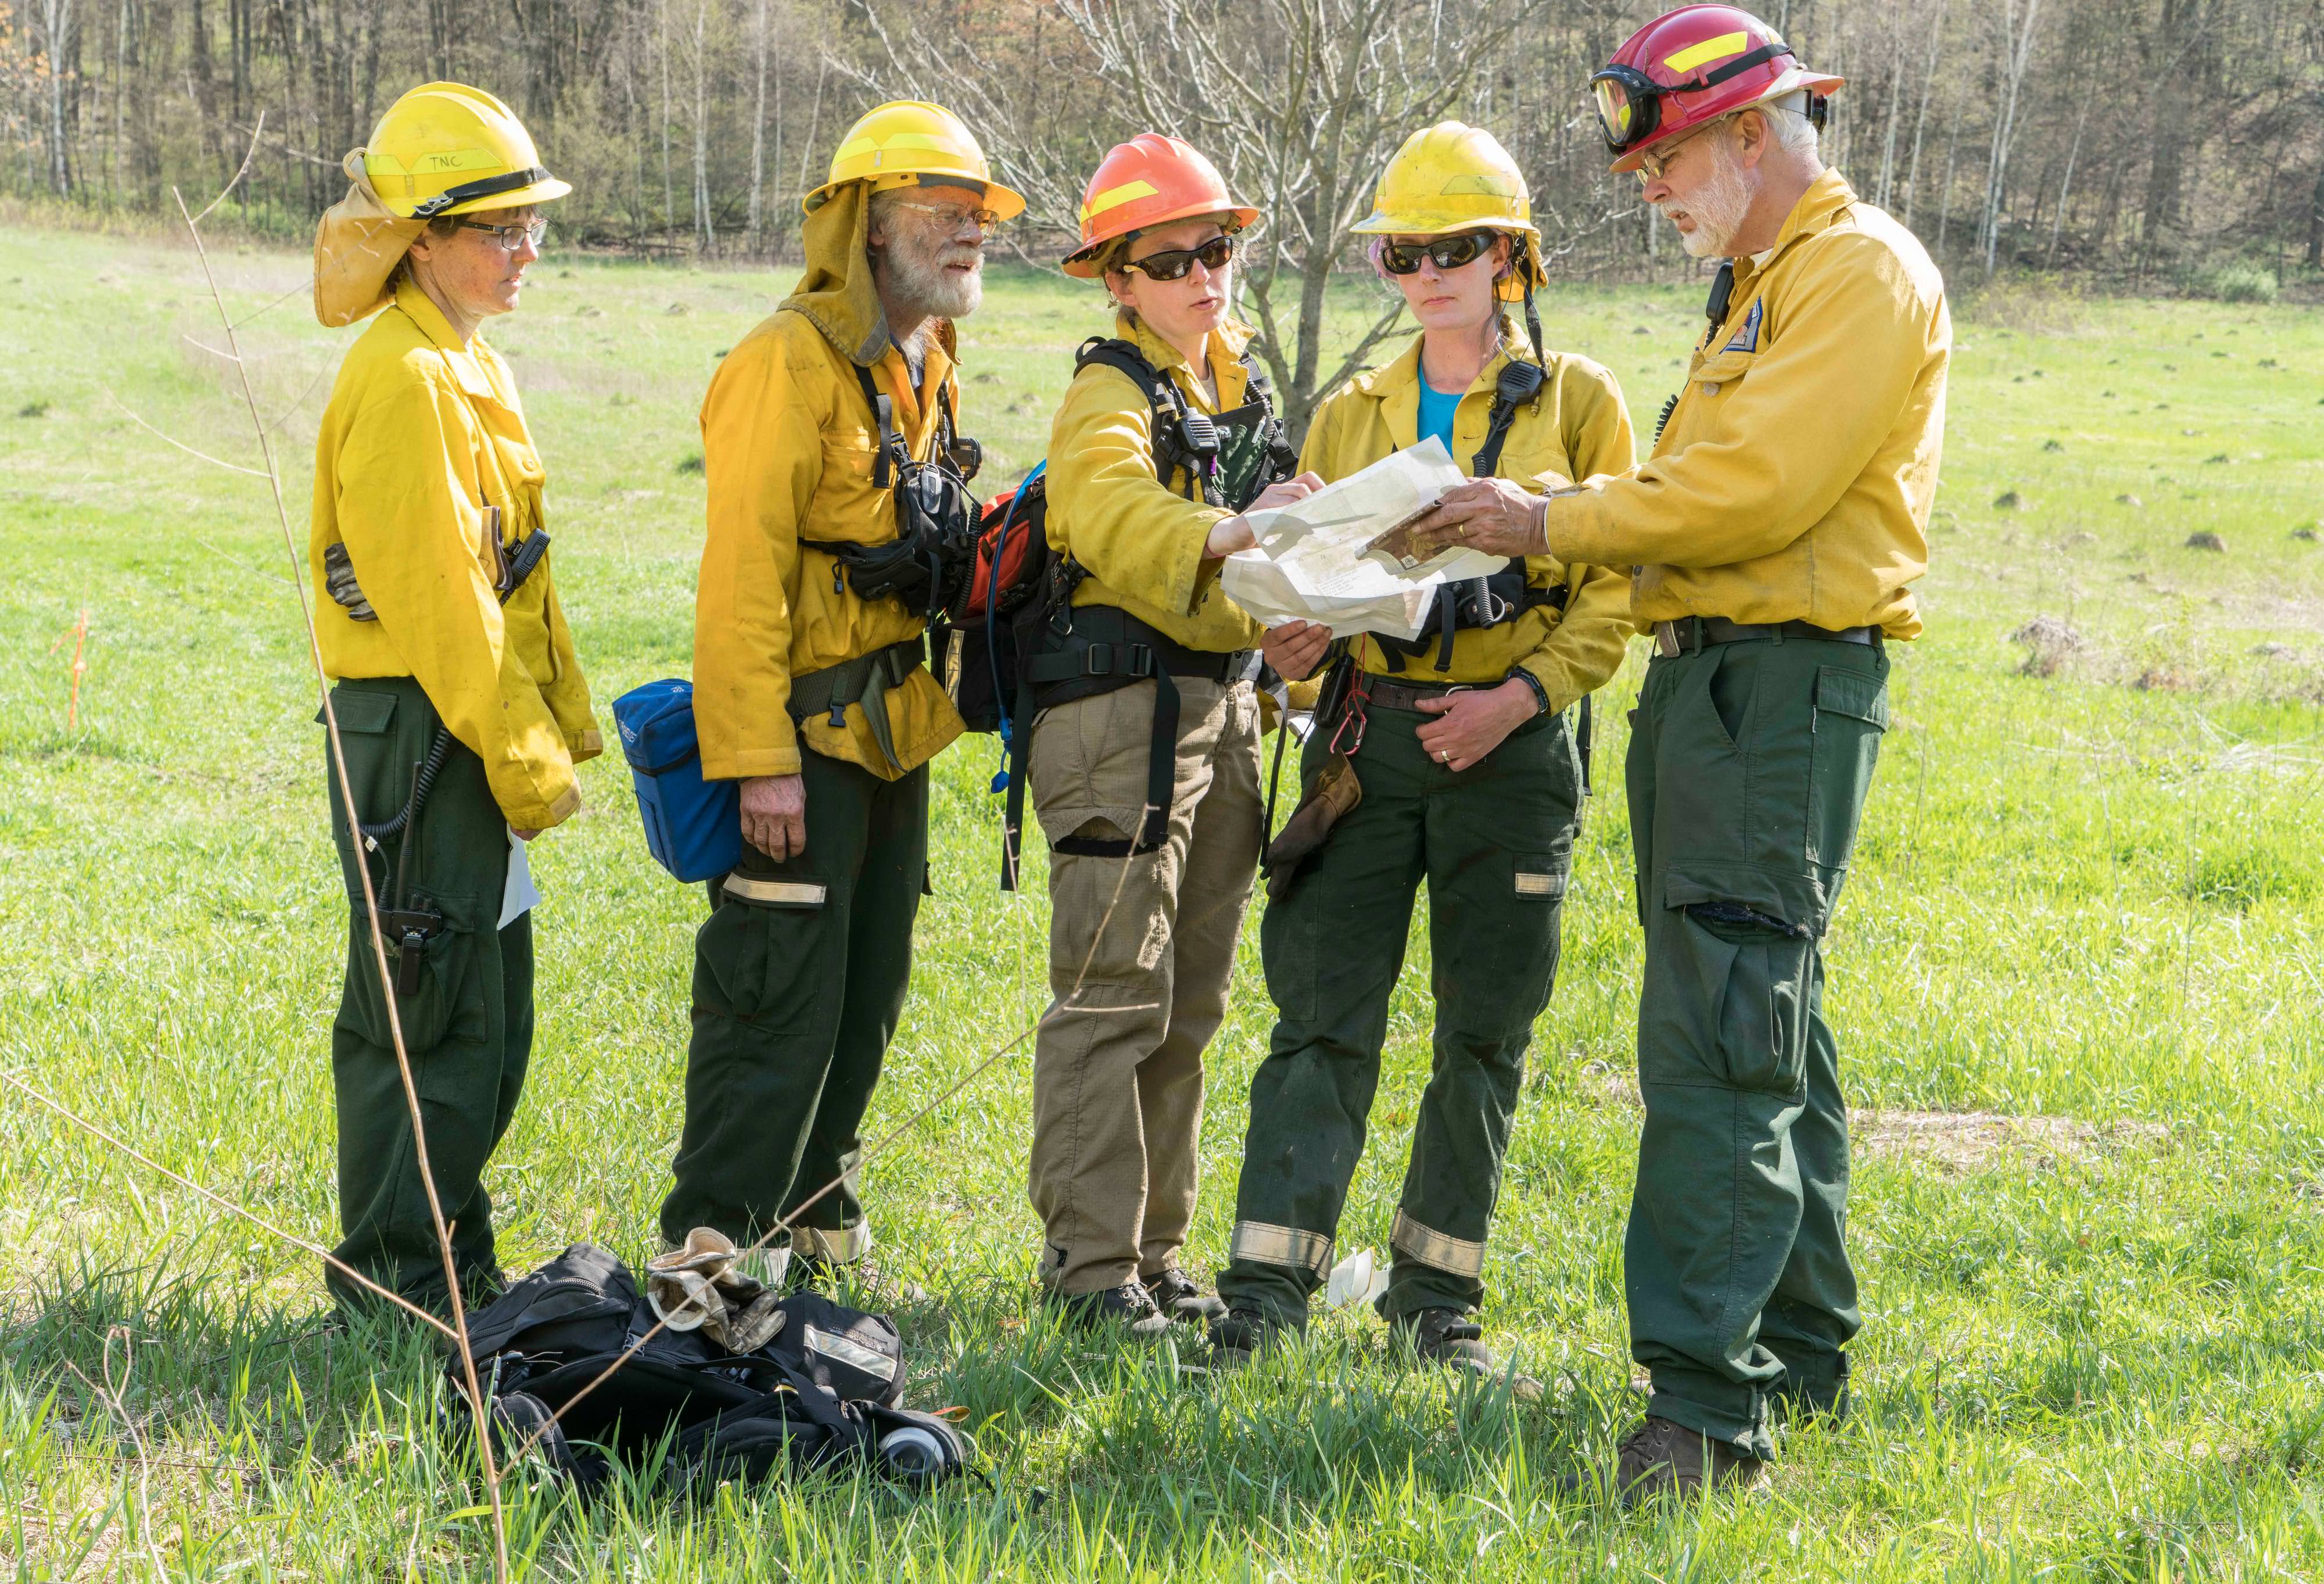 Five people dressed in yellow Nomex suits, helmets, goggles and other fire gear consult maps while working on a prescribed fire in Wisconsin.